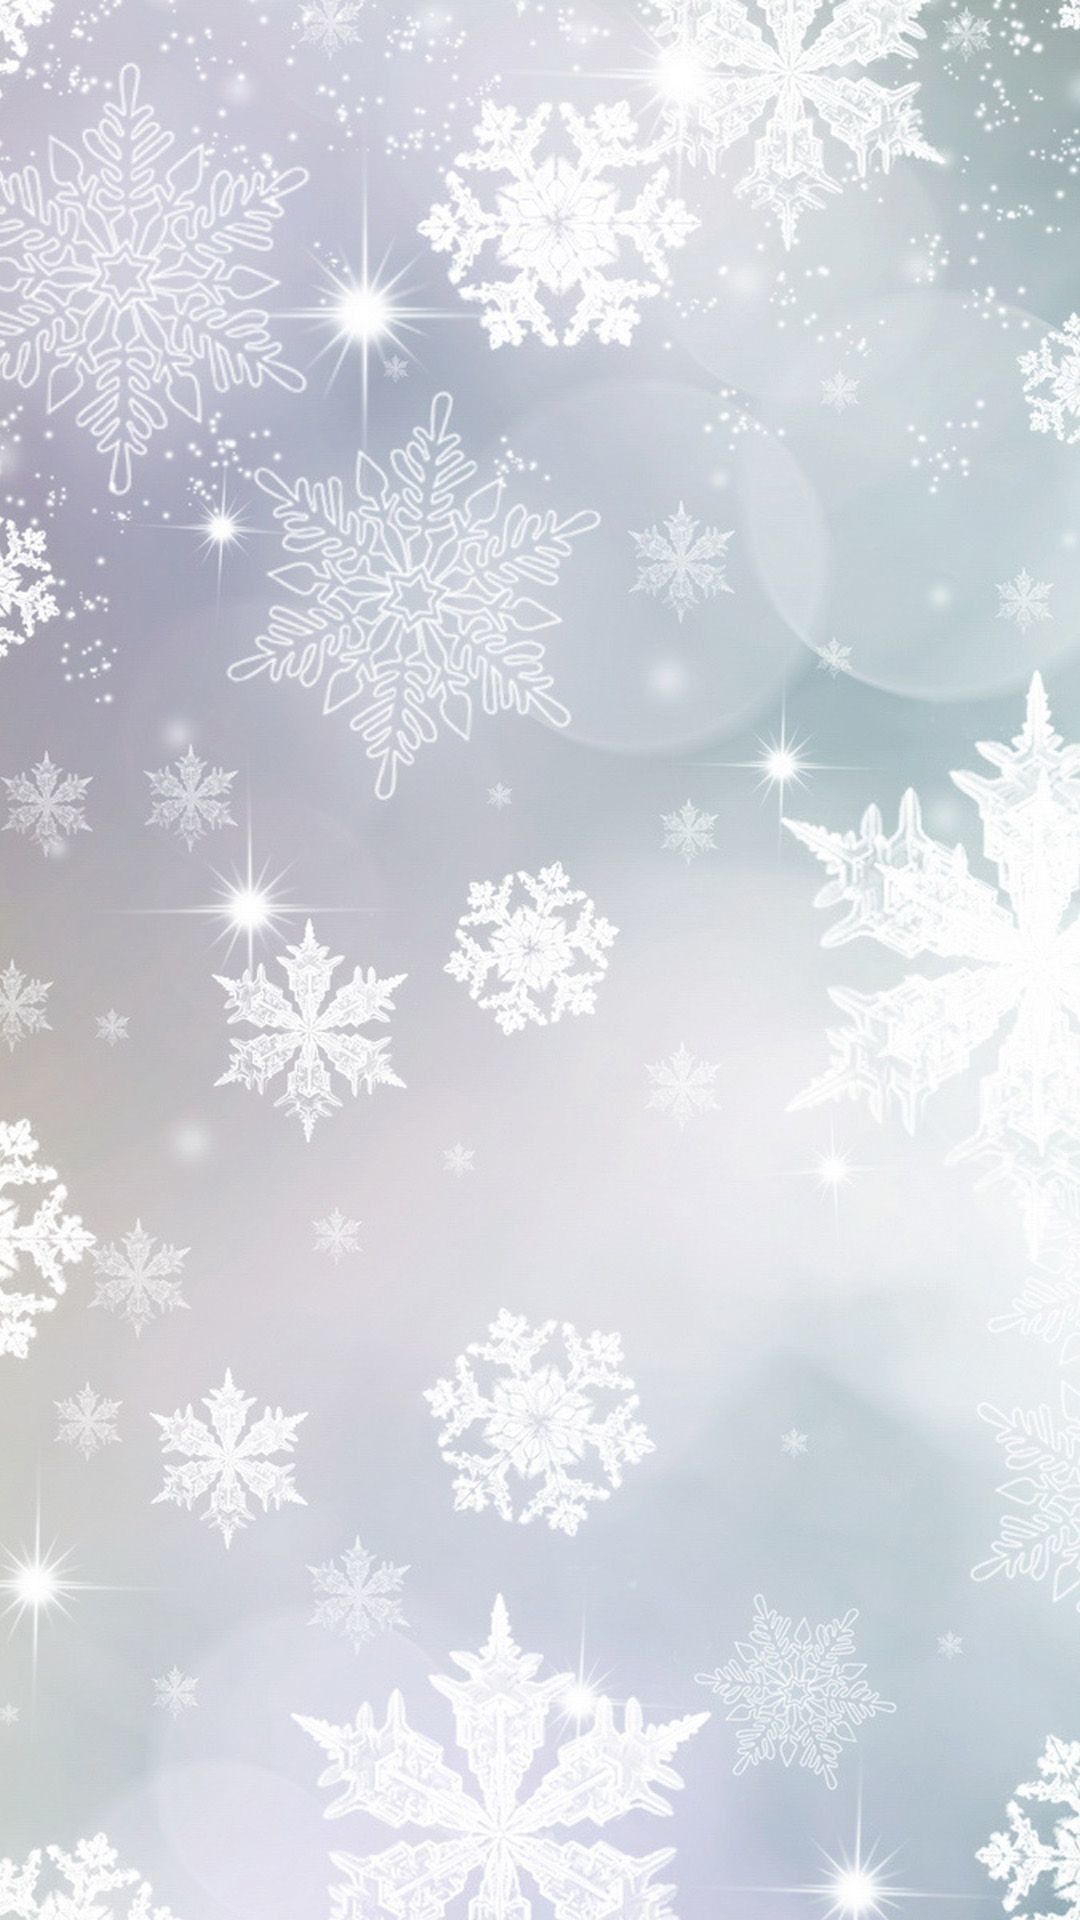 Free HD Winter Wallpaper Backgrounds For iPhone  Glory of the Snow